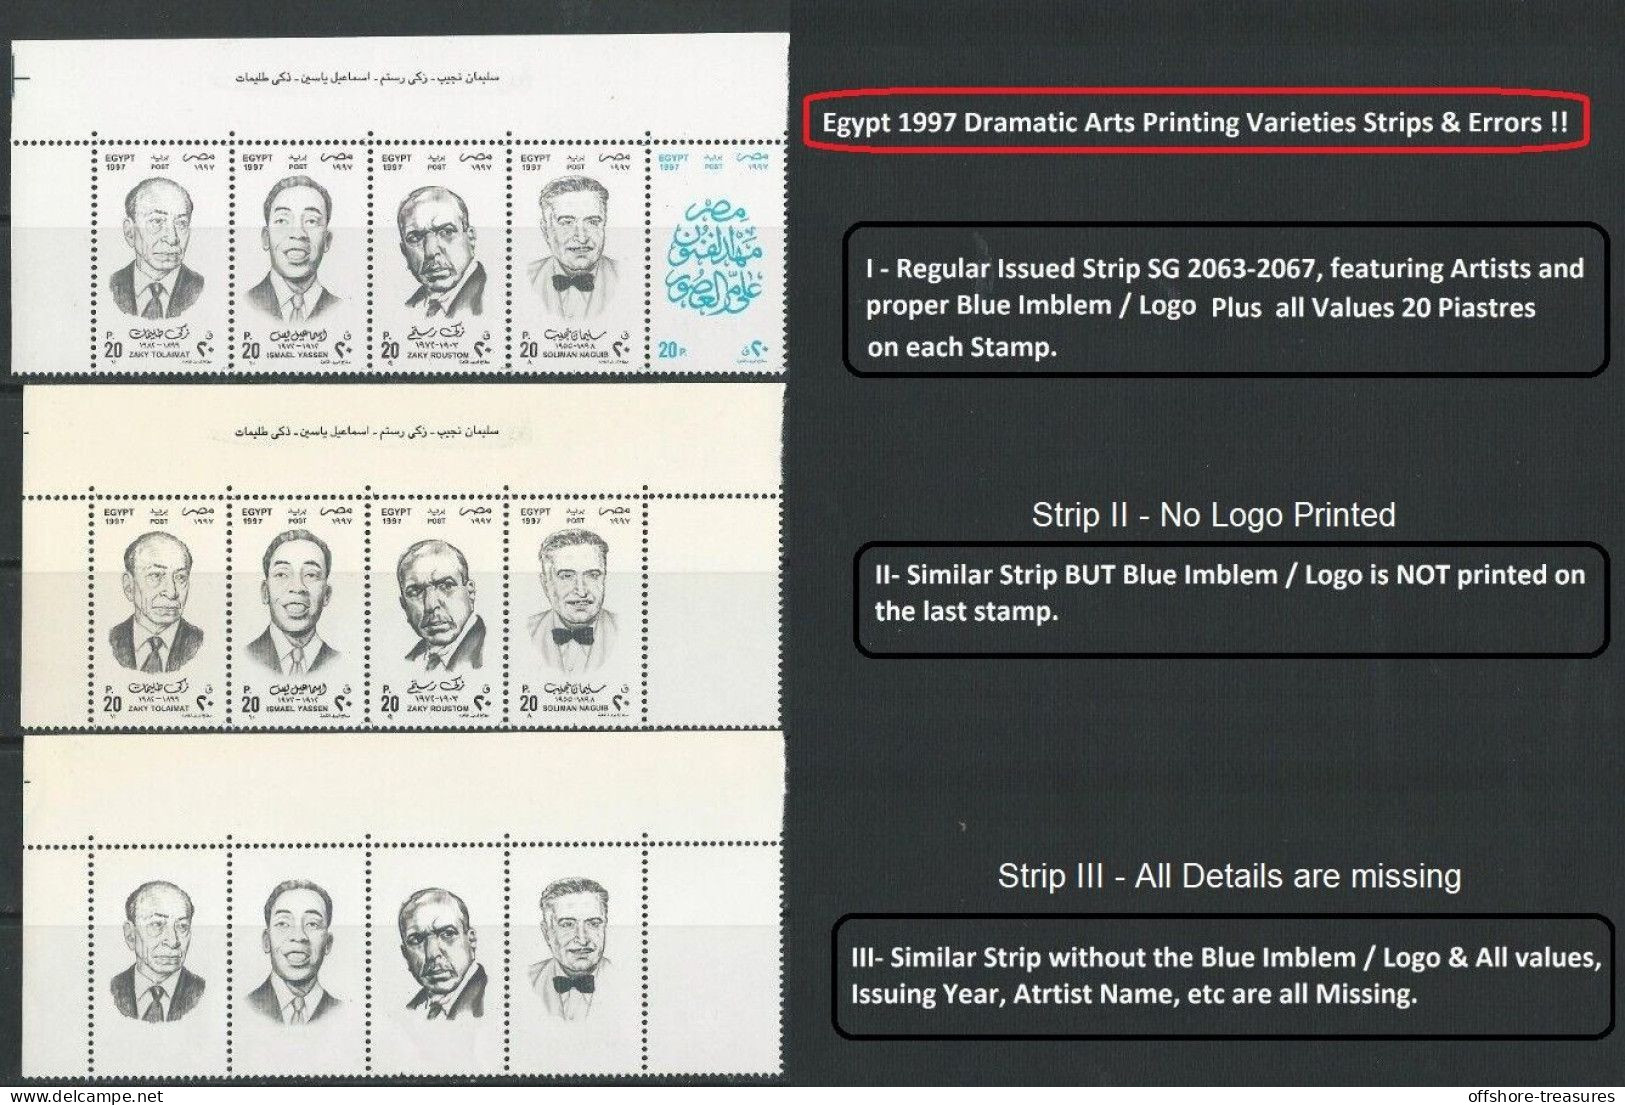 Egypt Stamp 1997 Dramatic Art / Artists VARIETY - Very RARE Print Error 3 X 5 Stamps - 3 Strips - Unused Stamps